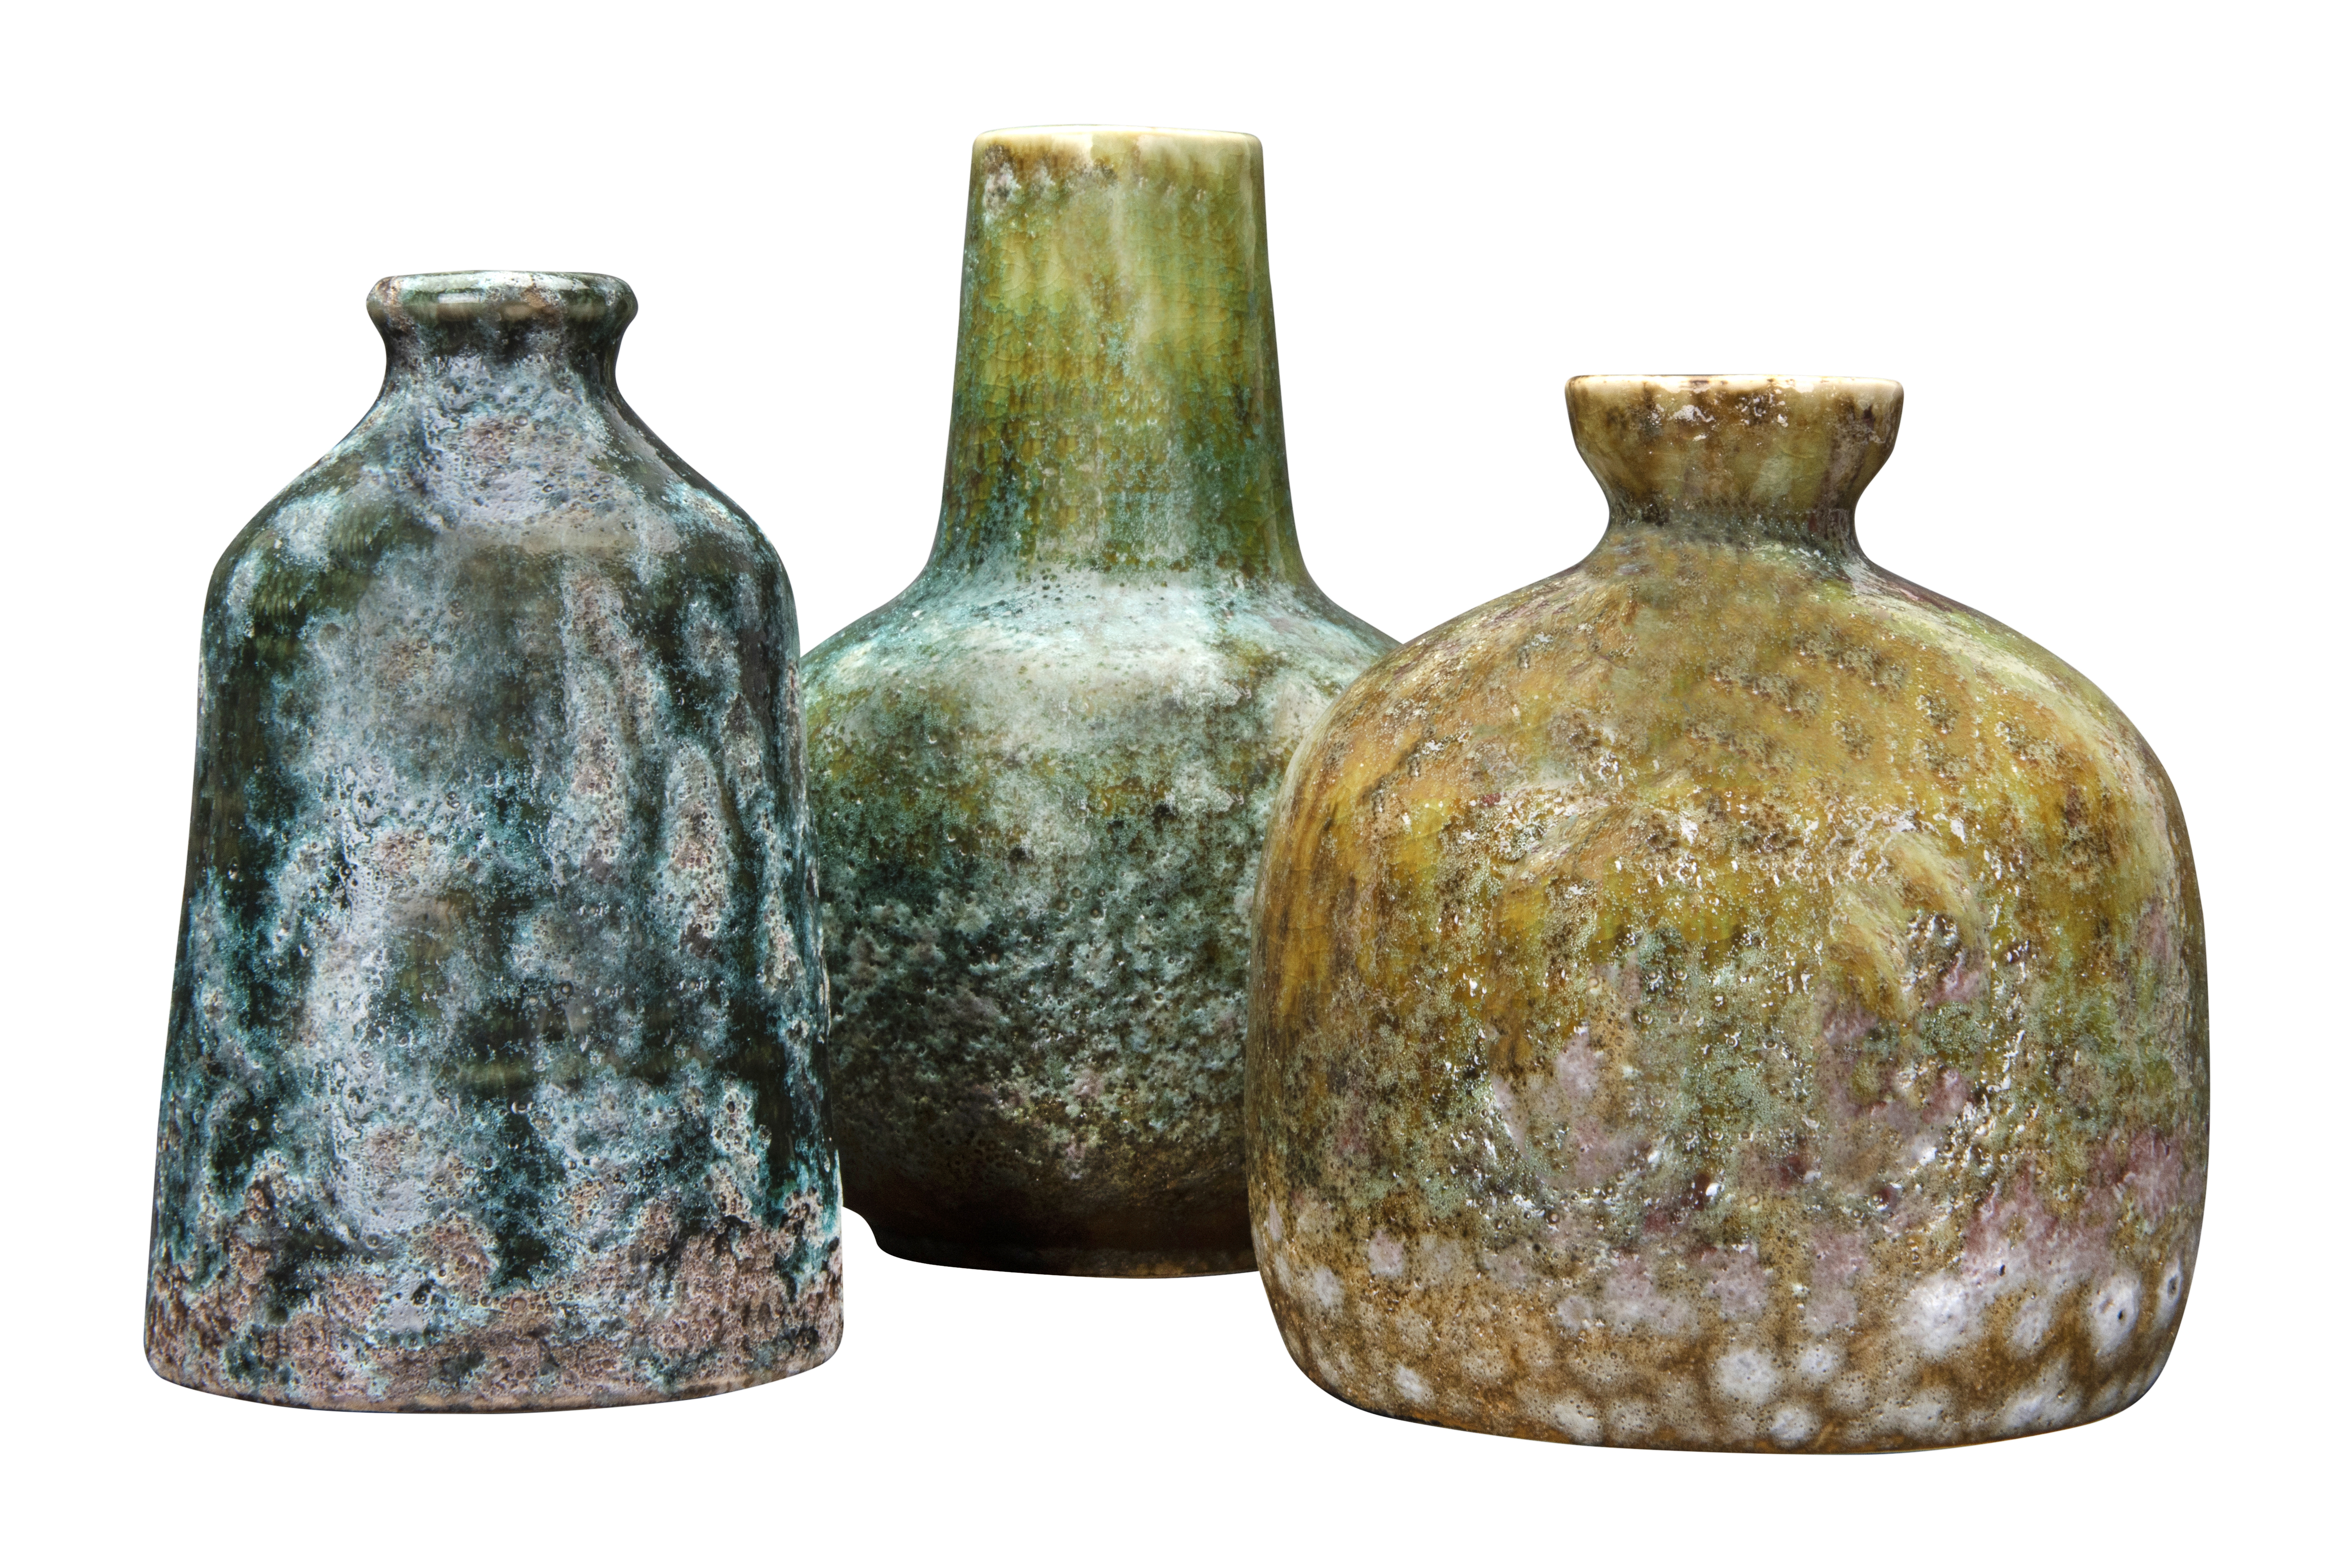 Green & Blue Textured Stoneware Vases (Set of 3 Shapes) - Nomad Home